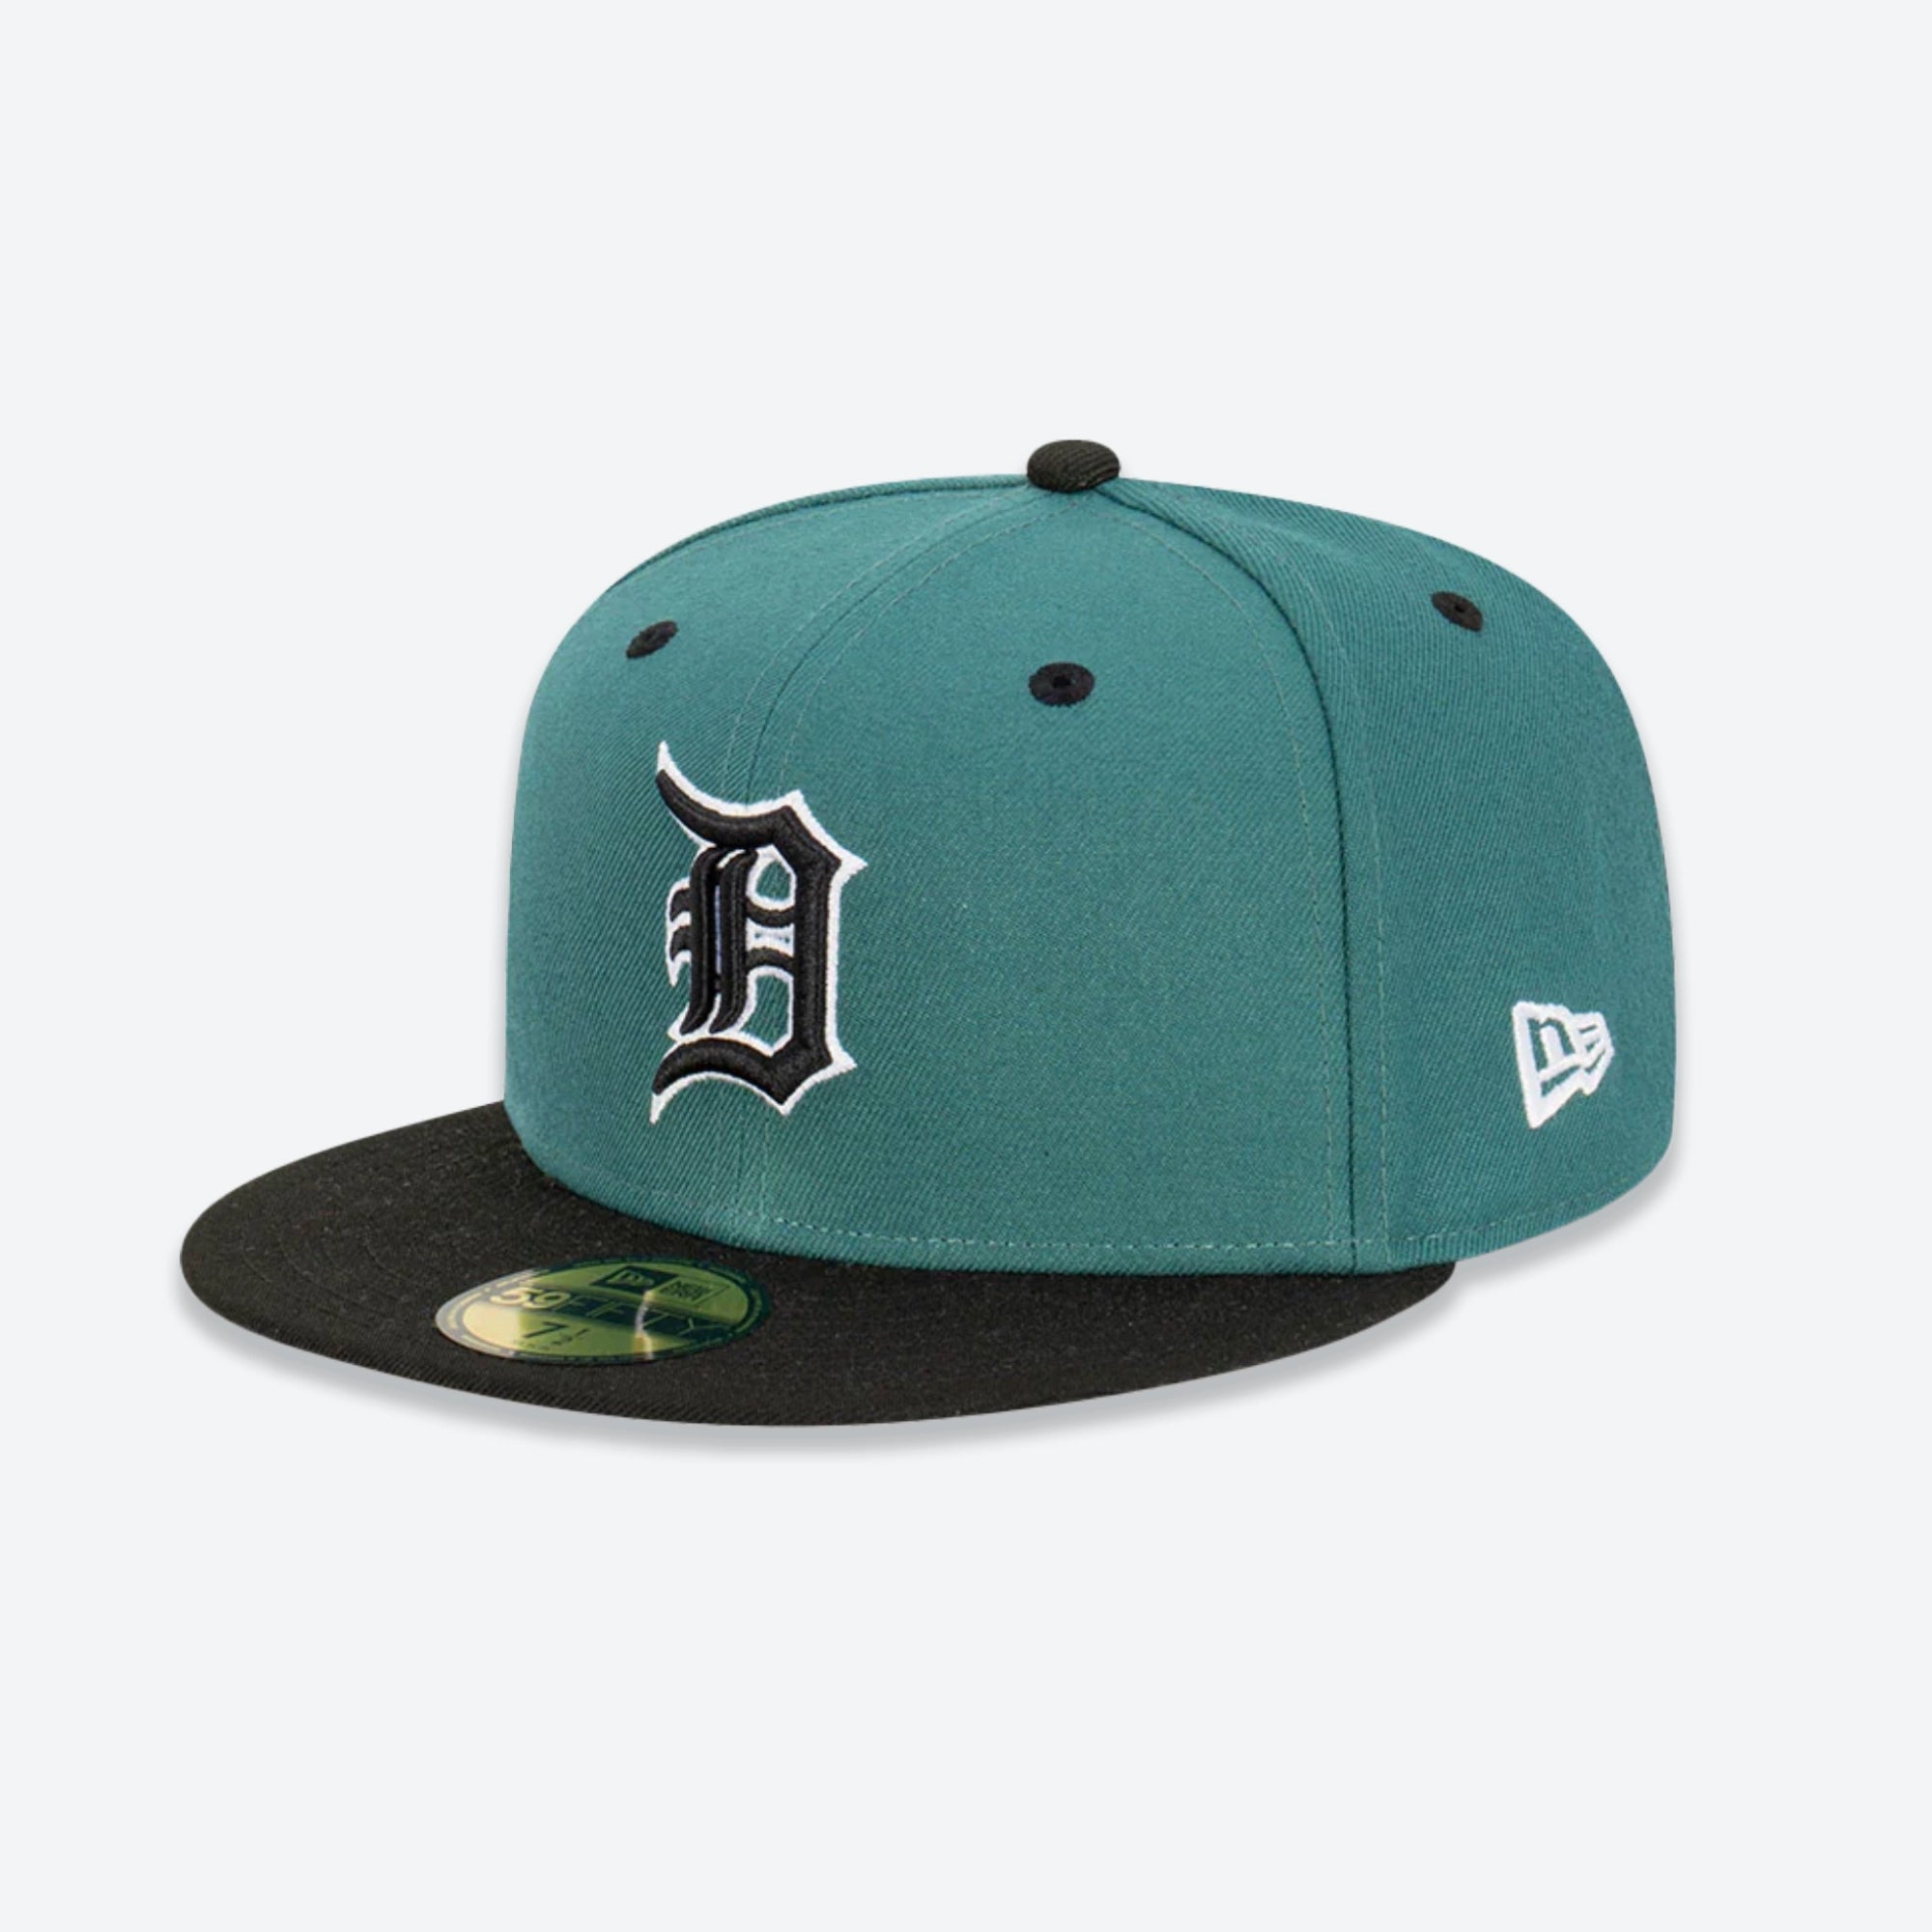 New Era 59FIFTY Detroit Tigers Fitted Hat Dark Green White